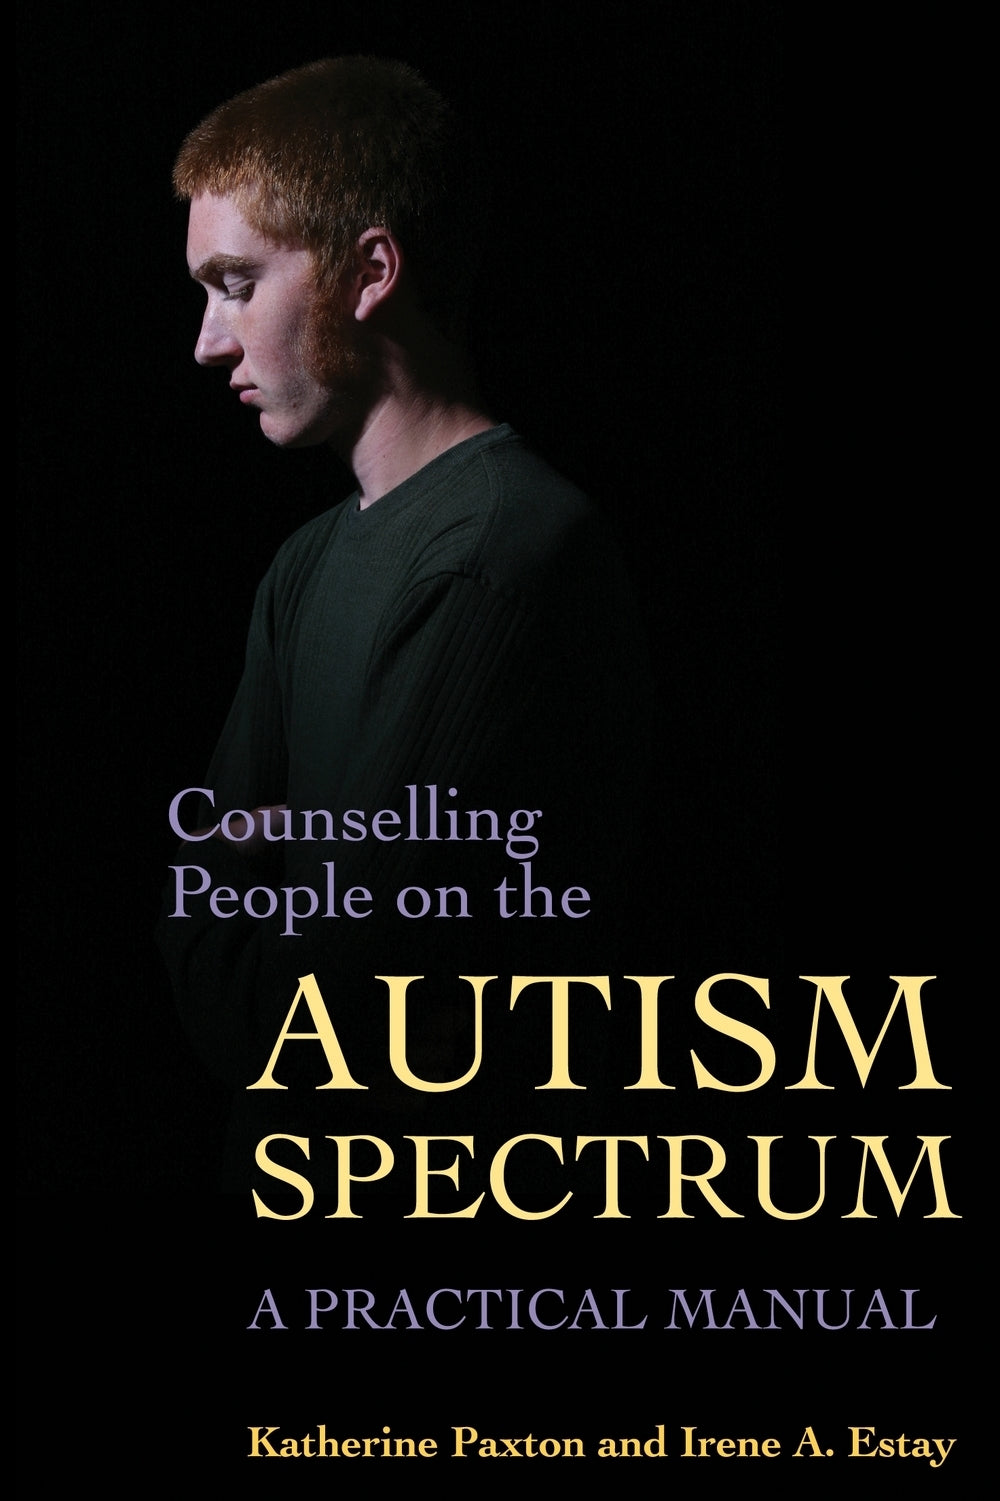 Counselling People on the Autism Spectrum by Katherine Paxton, Irene Estay